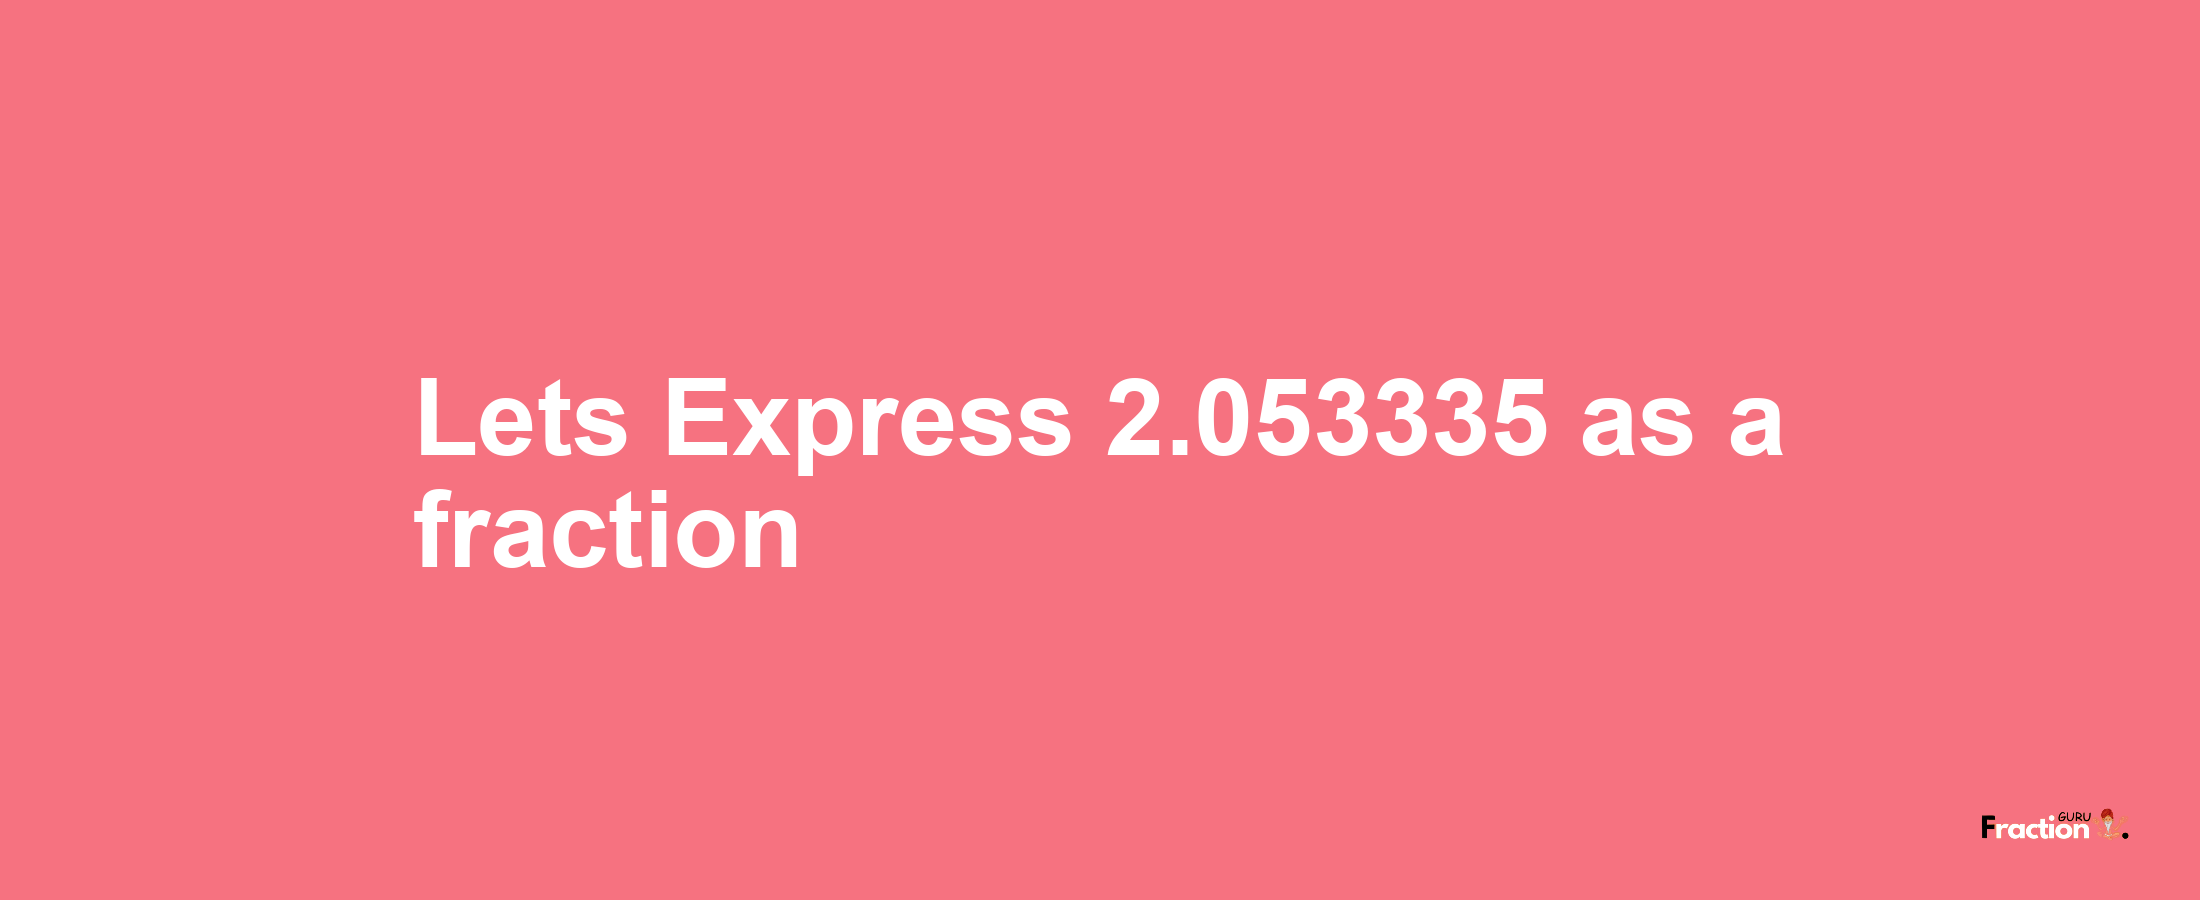 Lets Express 2.053335 as afraction